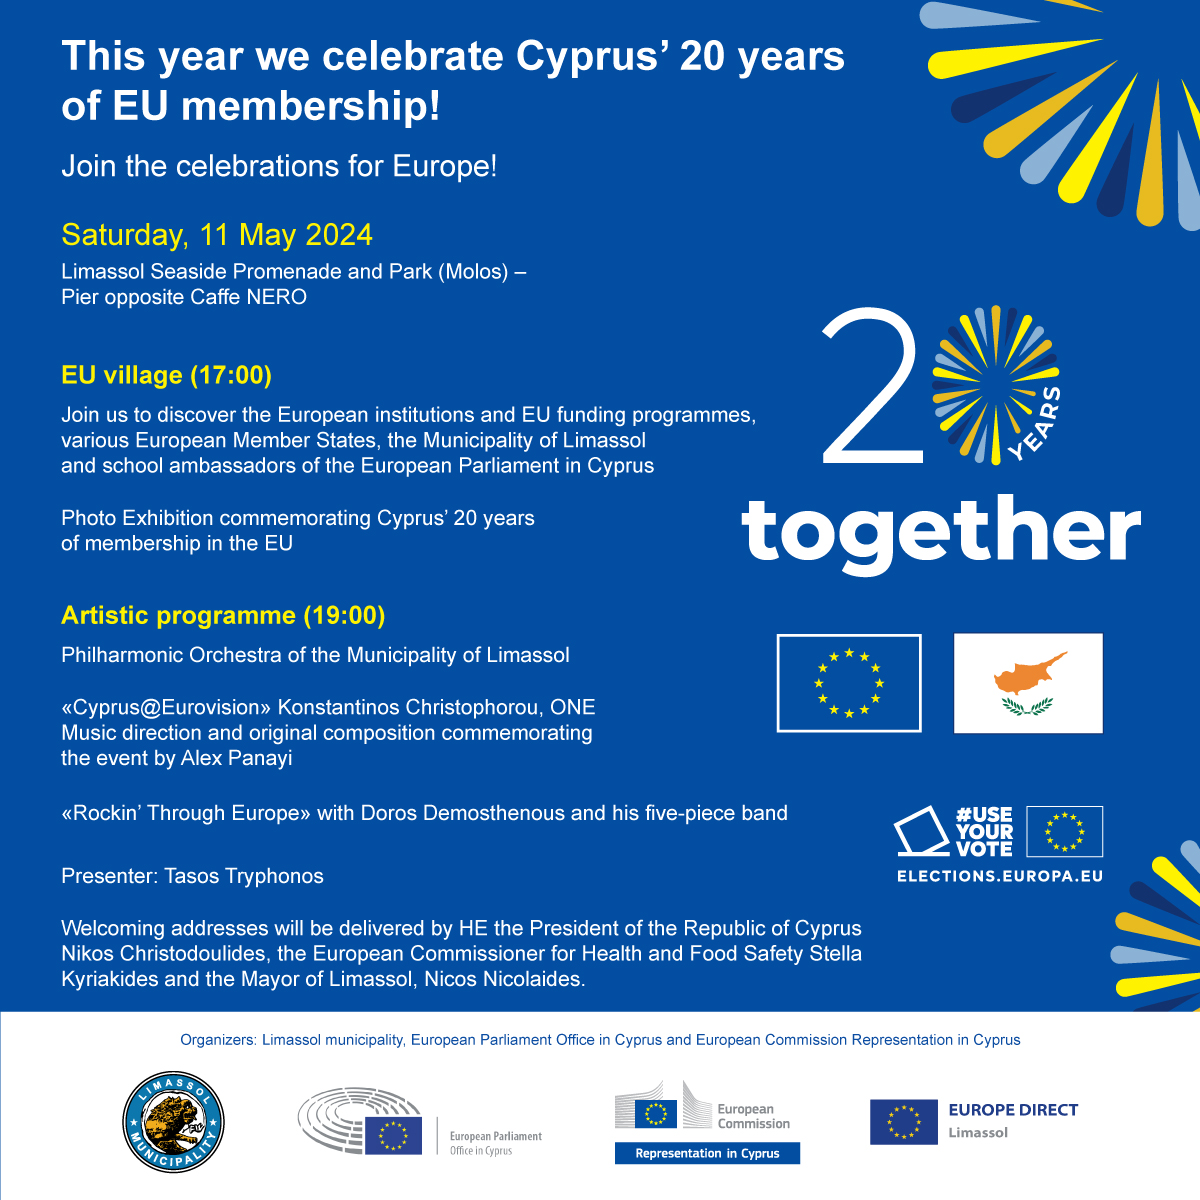 🎉Celebrate #EuropeDay! 

🗓️THIS Saturday 11 May
📍Molos Limassol

🔹5pm EU village
🔹7pm:
- Philharmonic Orchestra of @DemosLemesou 
- 'Cyprus@Eurovision' Konstantinos Christophorou, ONE, music direction and original composition by @AlexPanayi
- Doros Demosthenous and his band.